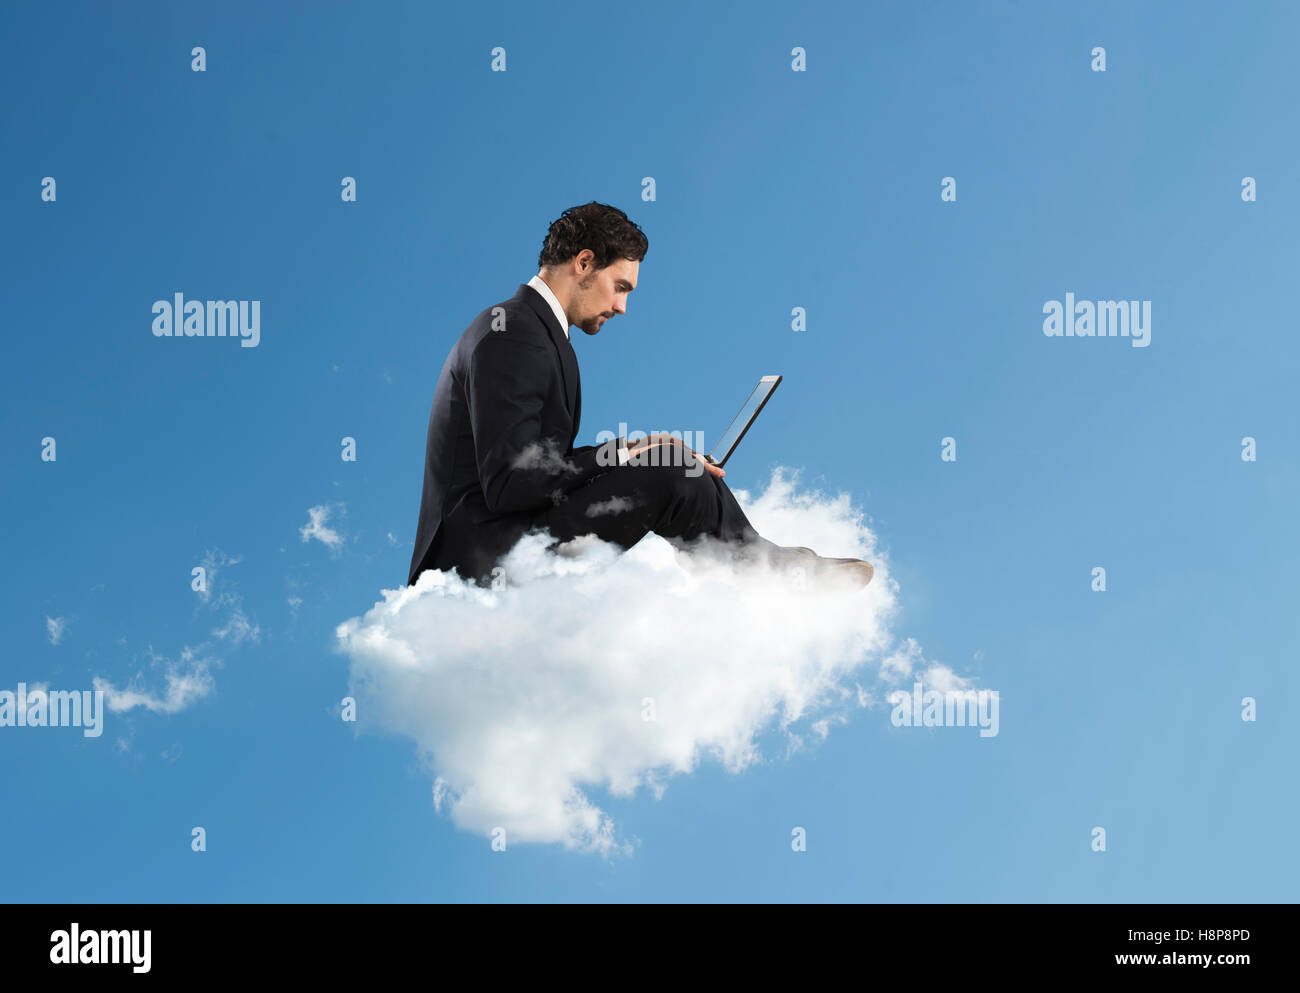 Internet and social network concept Stock Photo